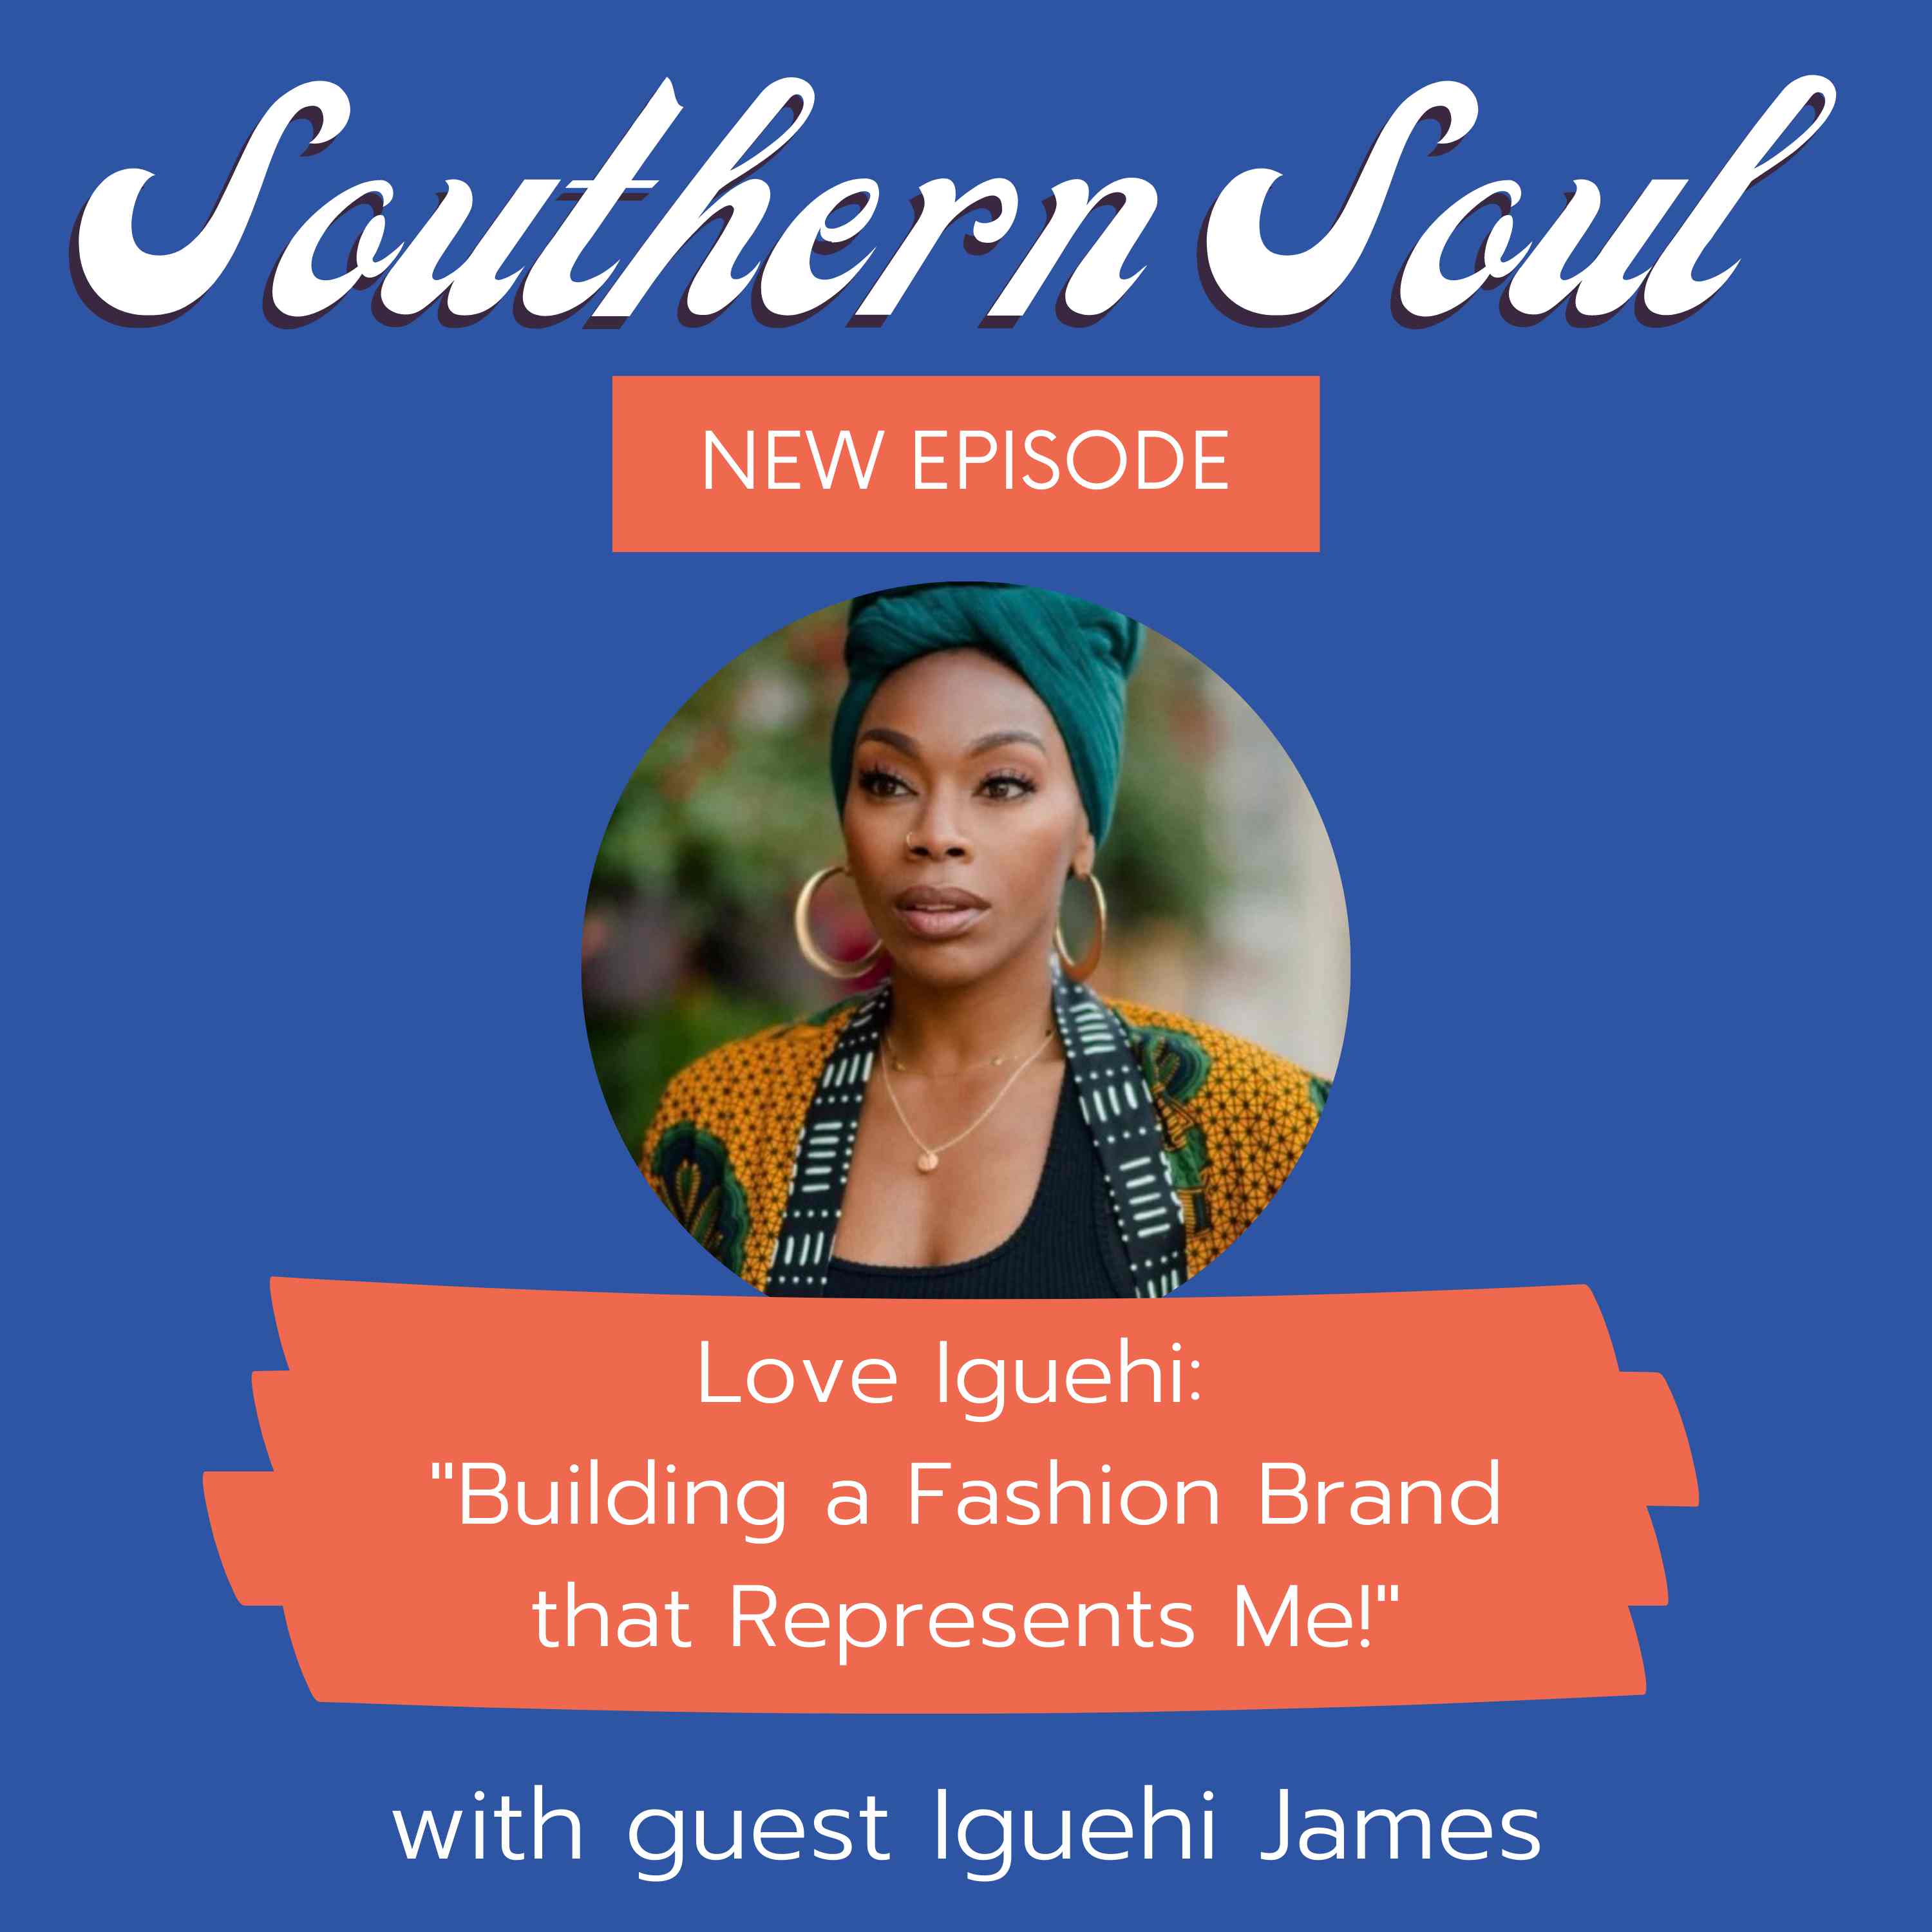 Love Iguehi! – ”Building a Fashion Brand that Represents Me!” Image